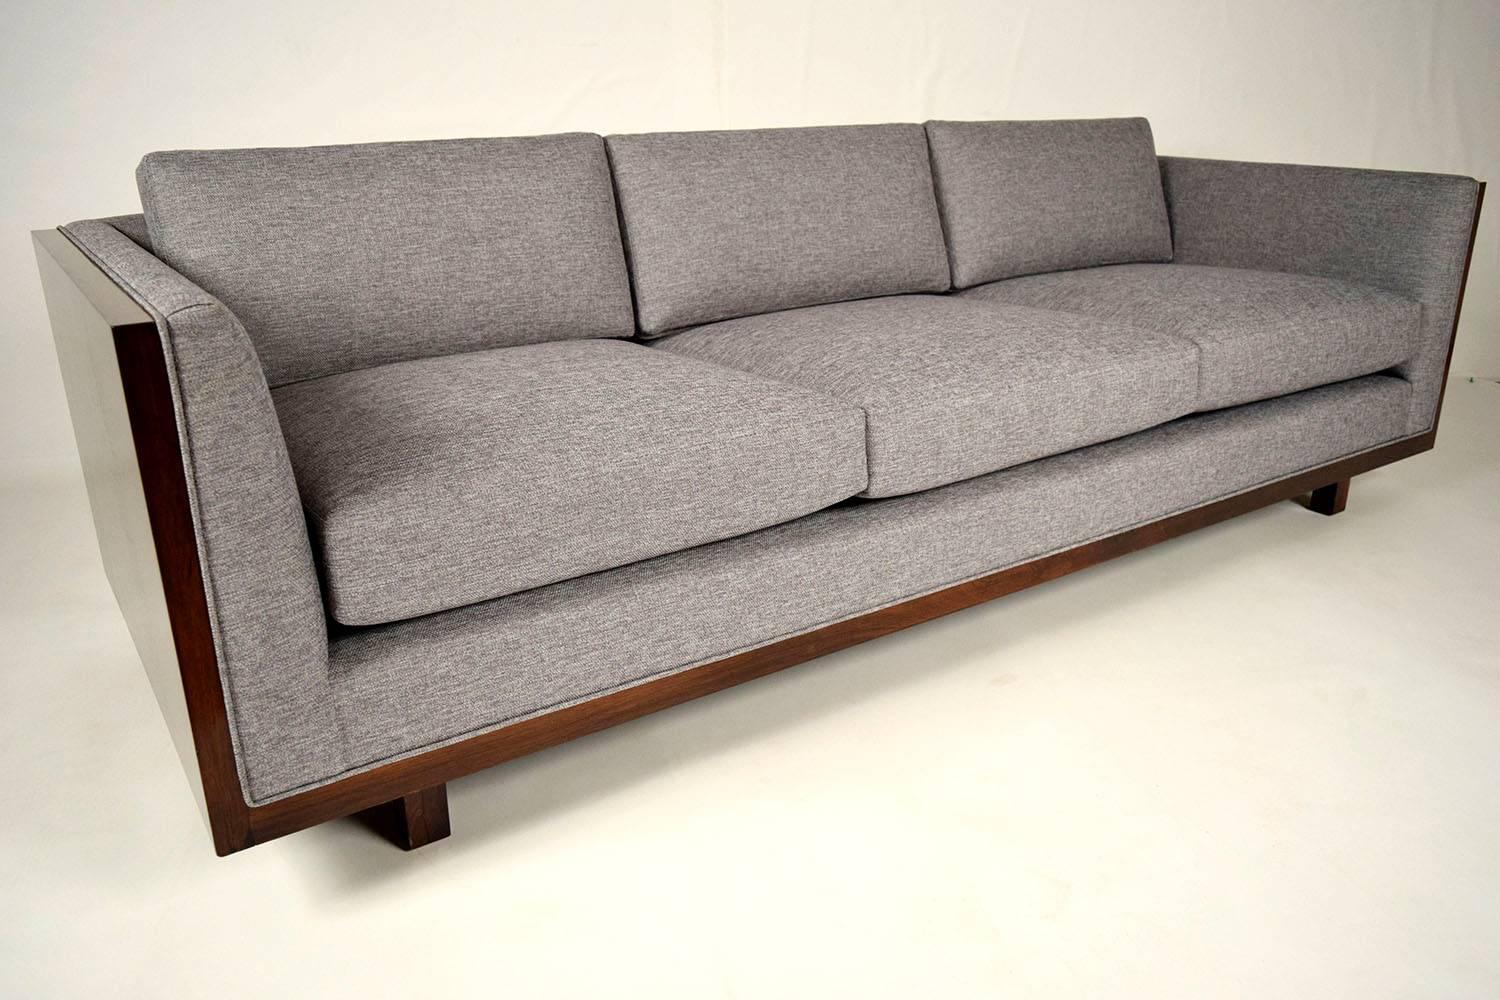 This is a elegant 1950s Milo Baughman Cube sofa. Wood frame has been newly refinished in a dark walnut color with a lacquered finish. Professionally reupholstered in a gray fabric with single piping trims. Has three back pillows and three seat